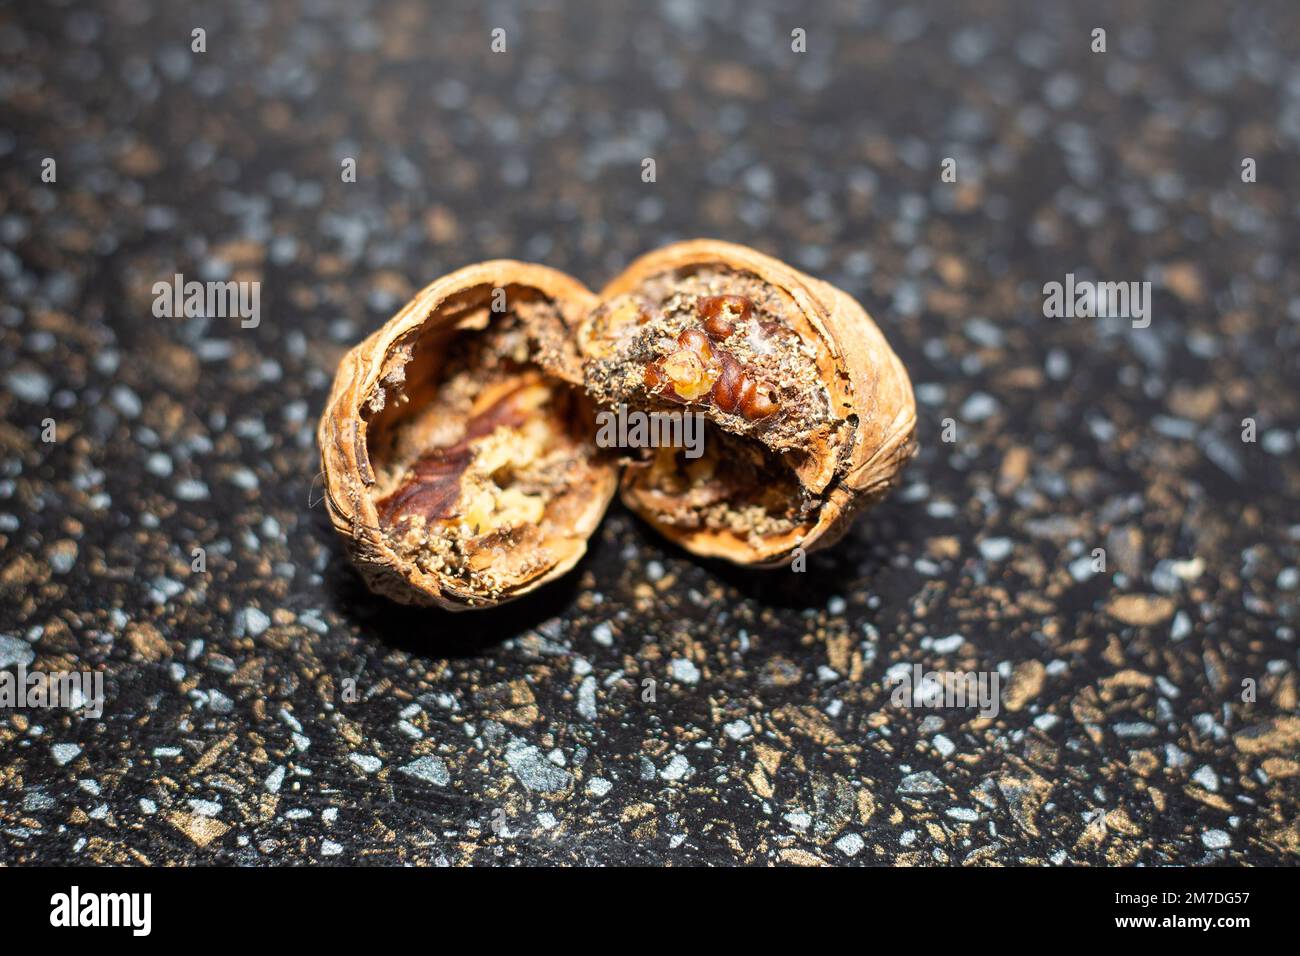 Spoiled walnuts infested by the walnut moth lie on a black table. Stock Photo